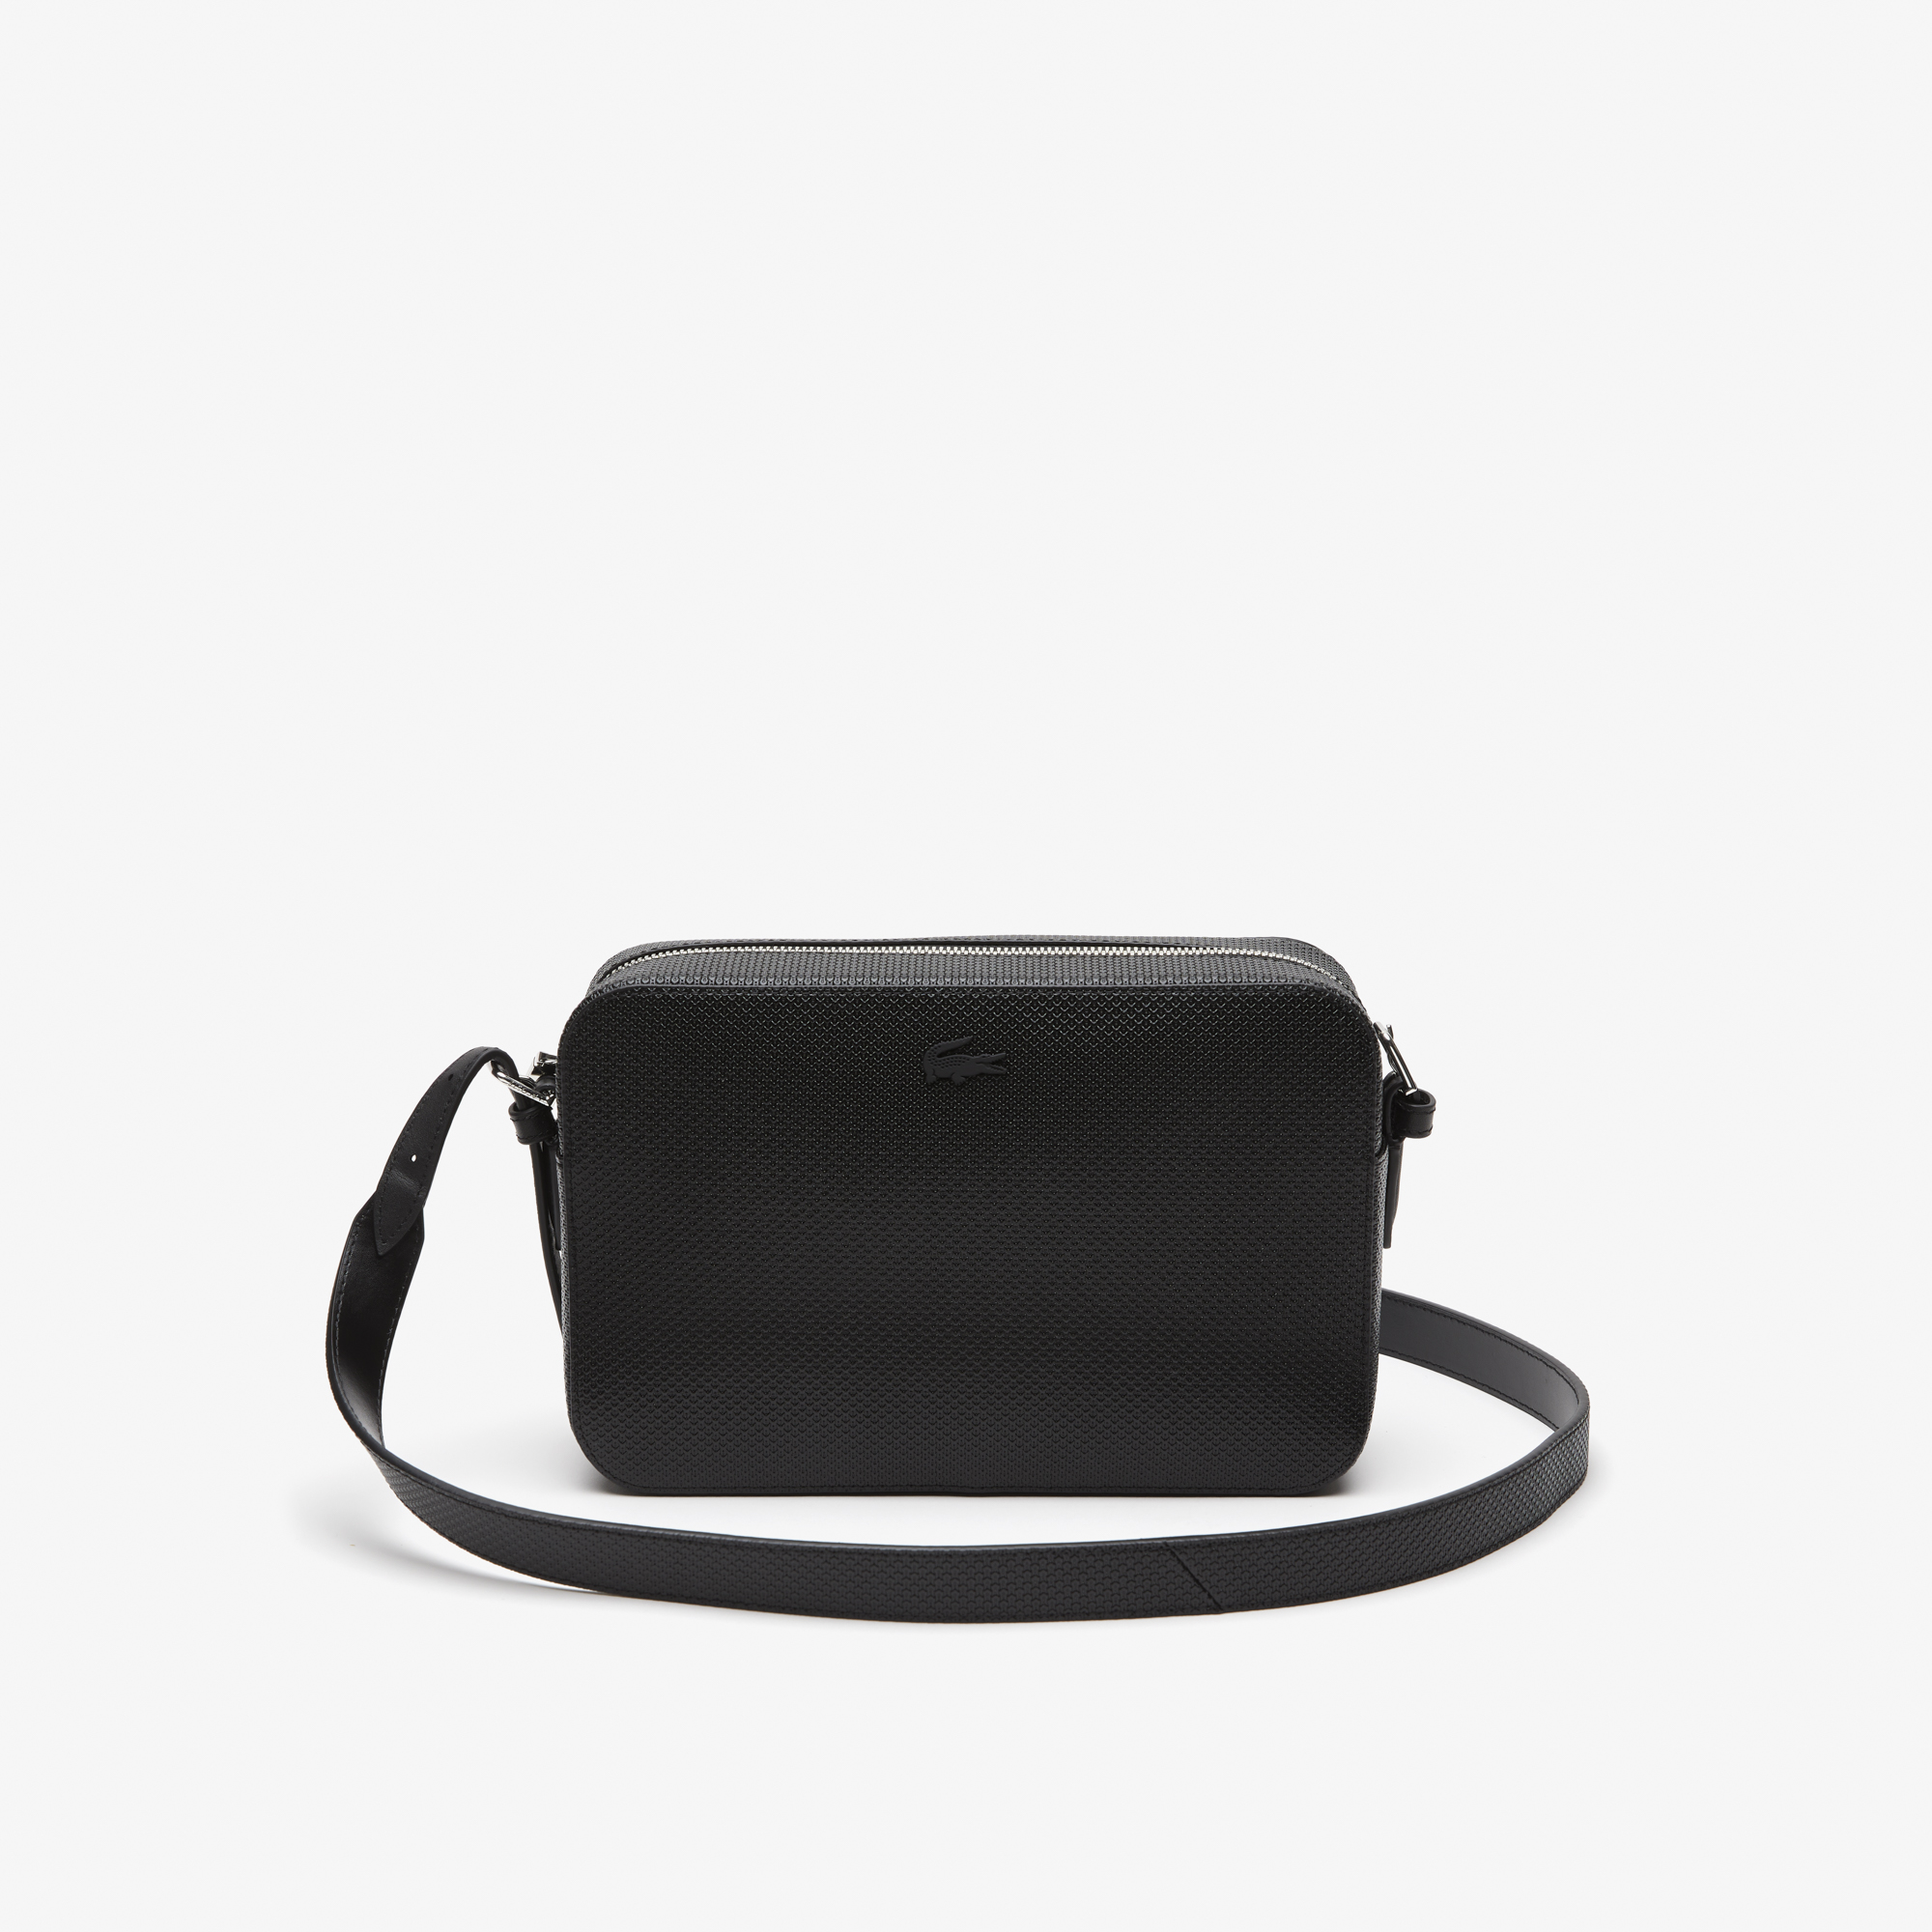 Buy Lacoste Women's Top Grain Leather Square Shoulder Bag (NF4252000) (Black)  at Amazon.in